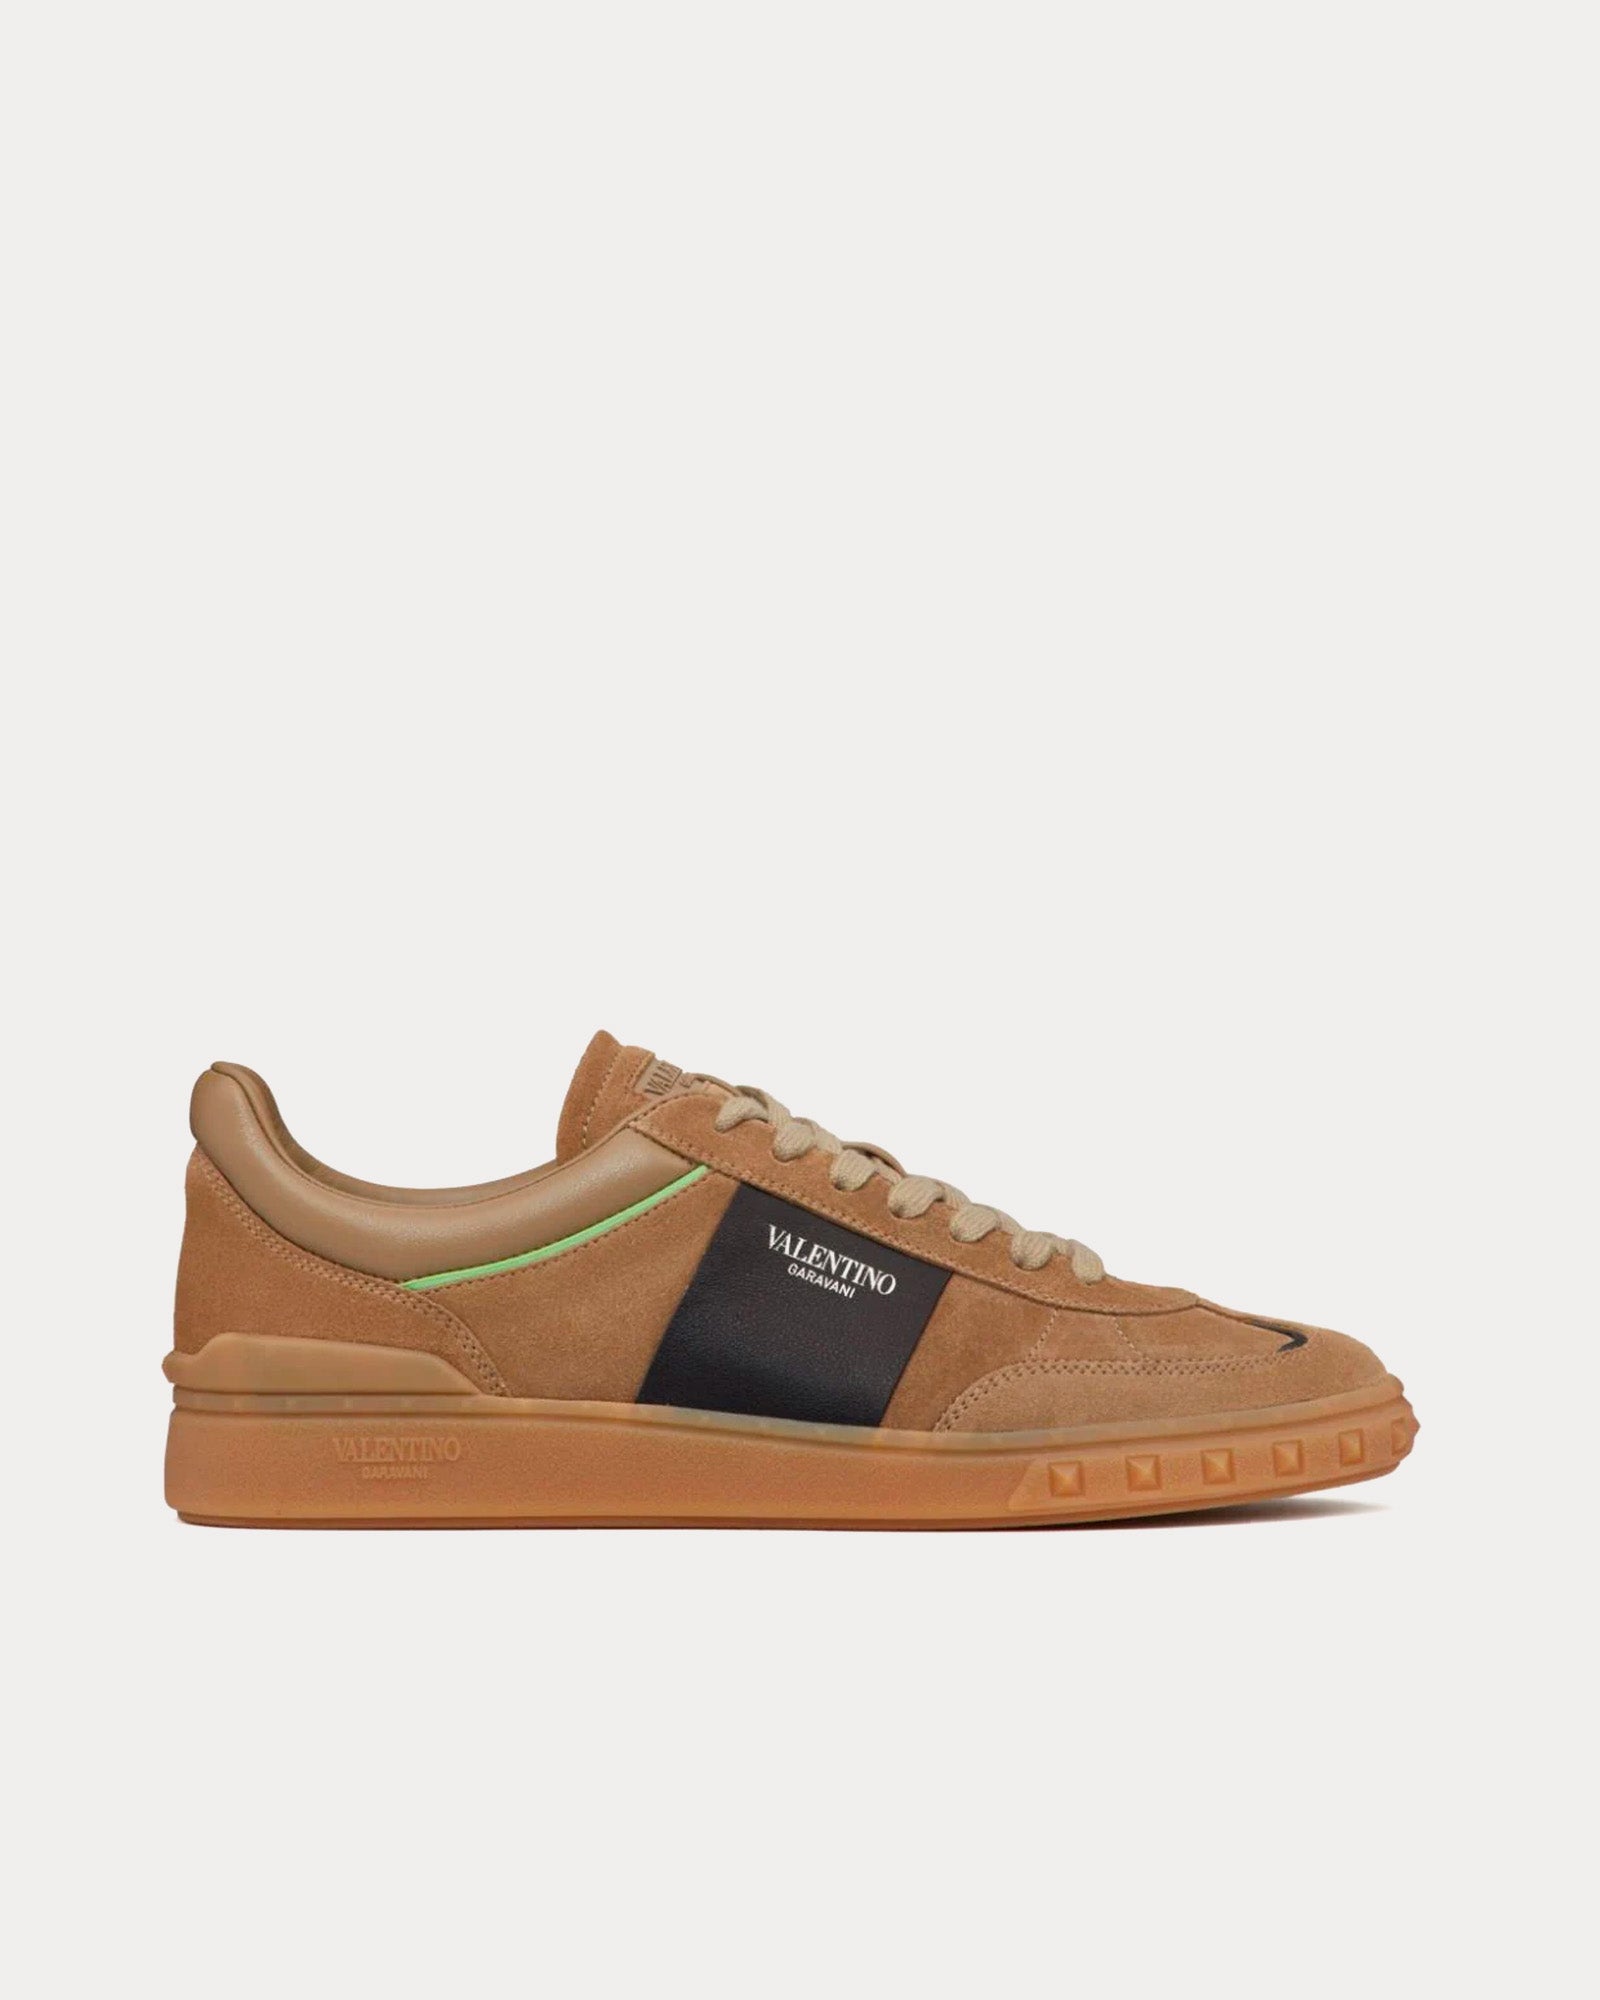 Valentino - Upvillage Leather Brown / Black Low Top Sneakers